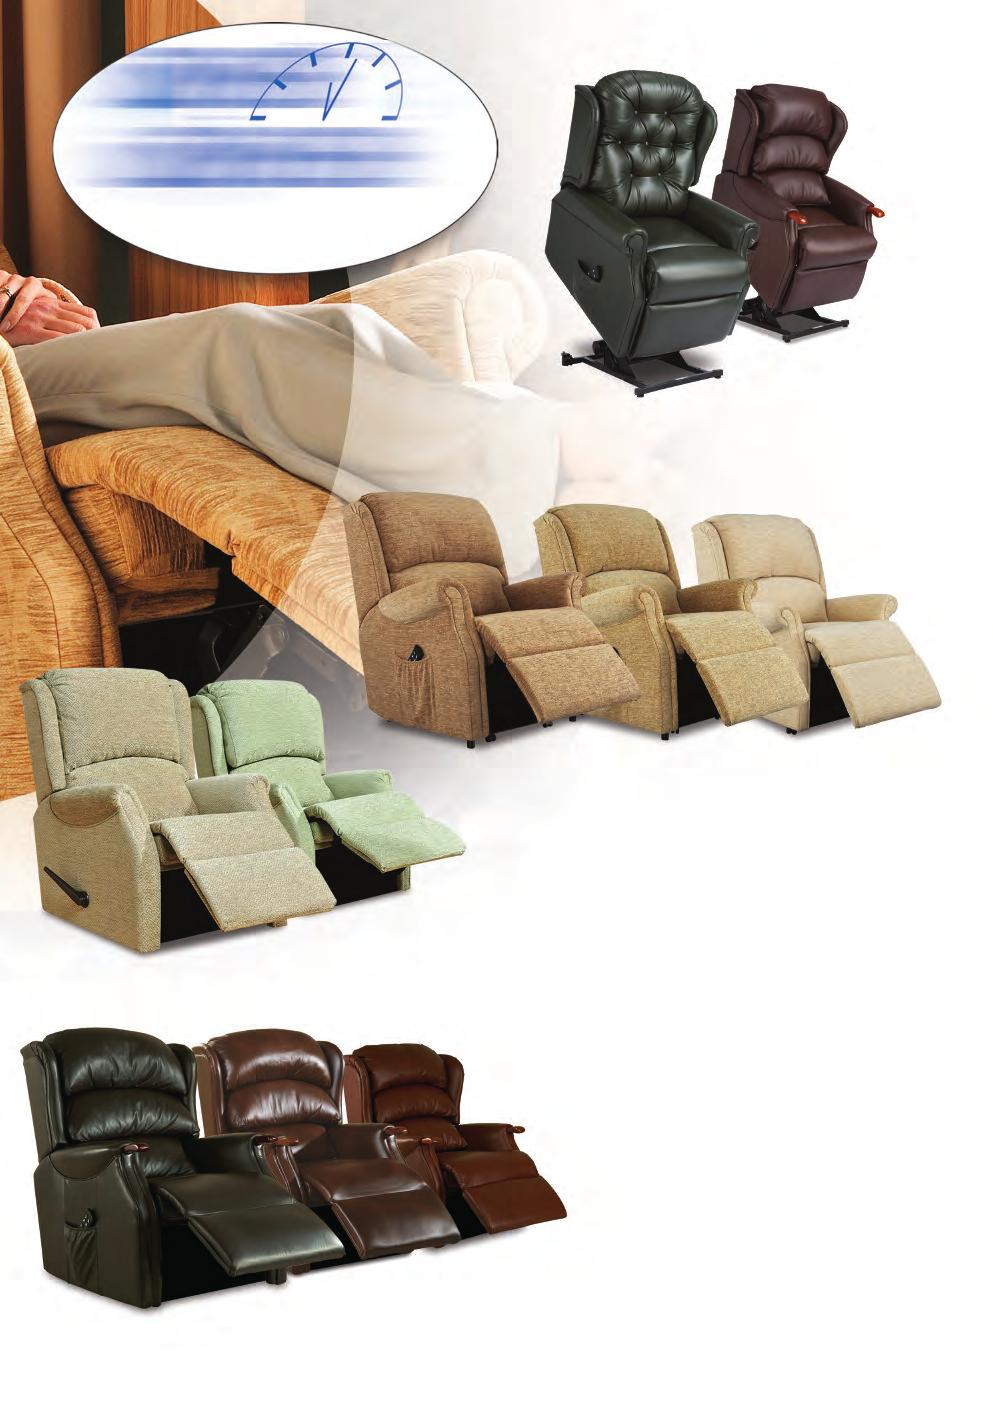 Woburn Westbury Why wait for the luxury of leather? The Woburn Grande and models plus the Westbury option are all available in a choice of three leathers on ZipSPEED delivery.